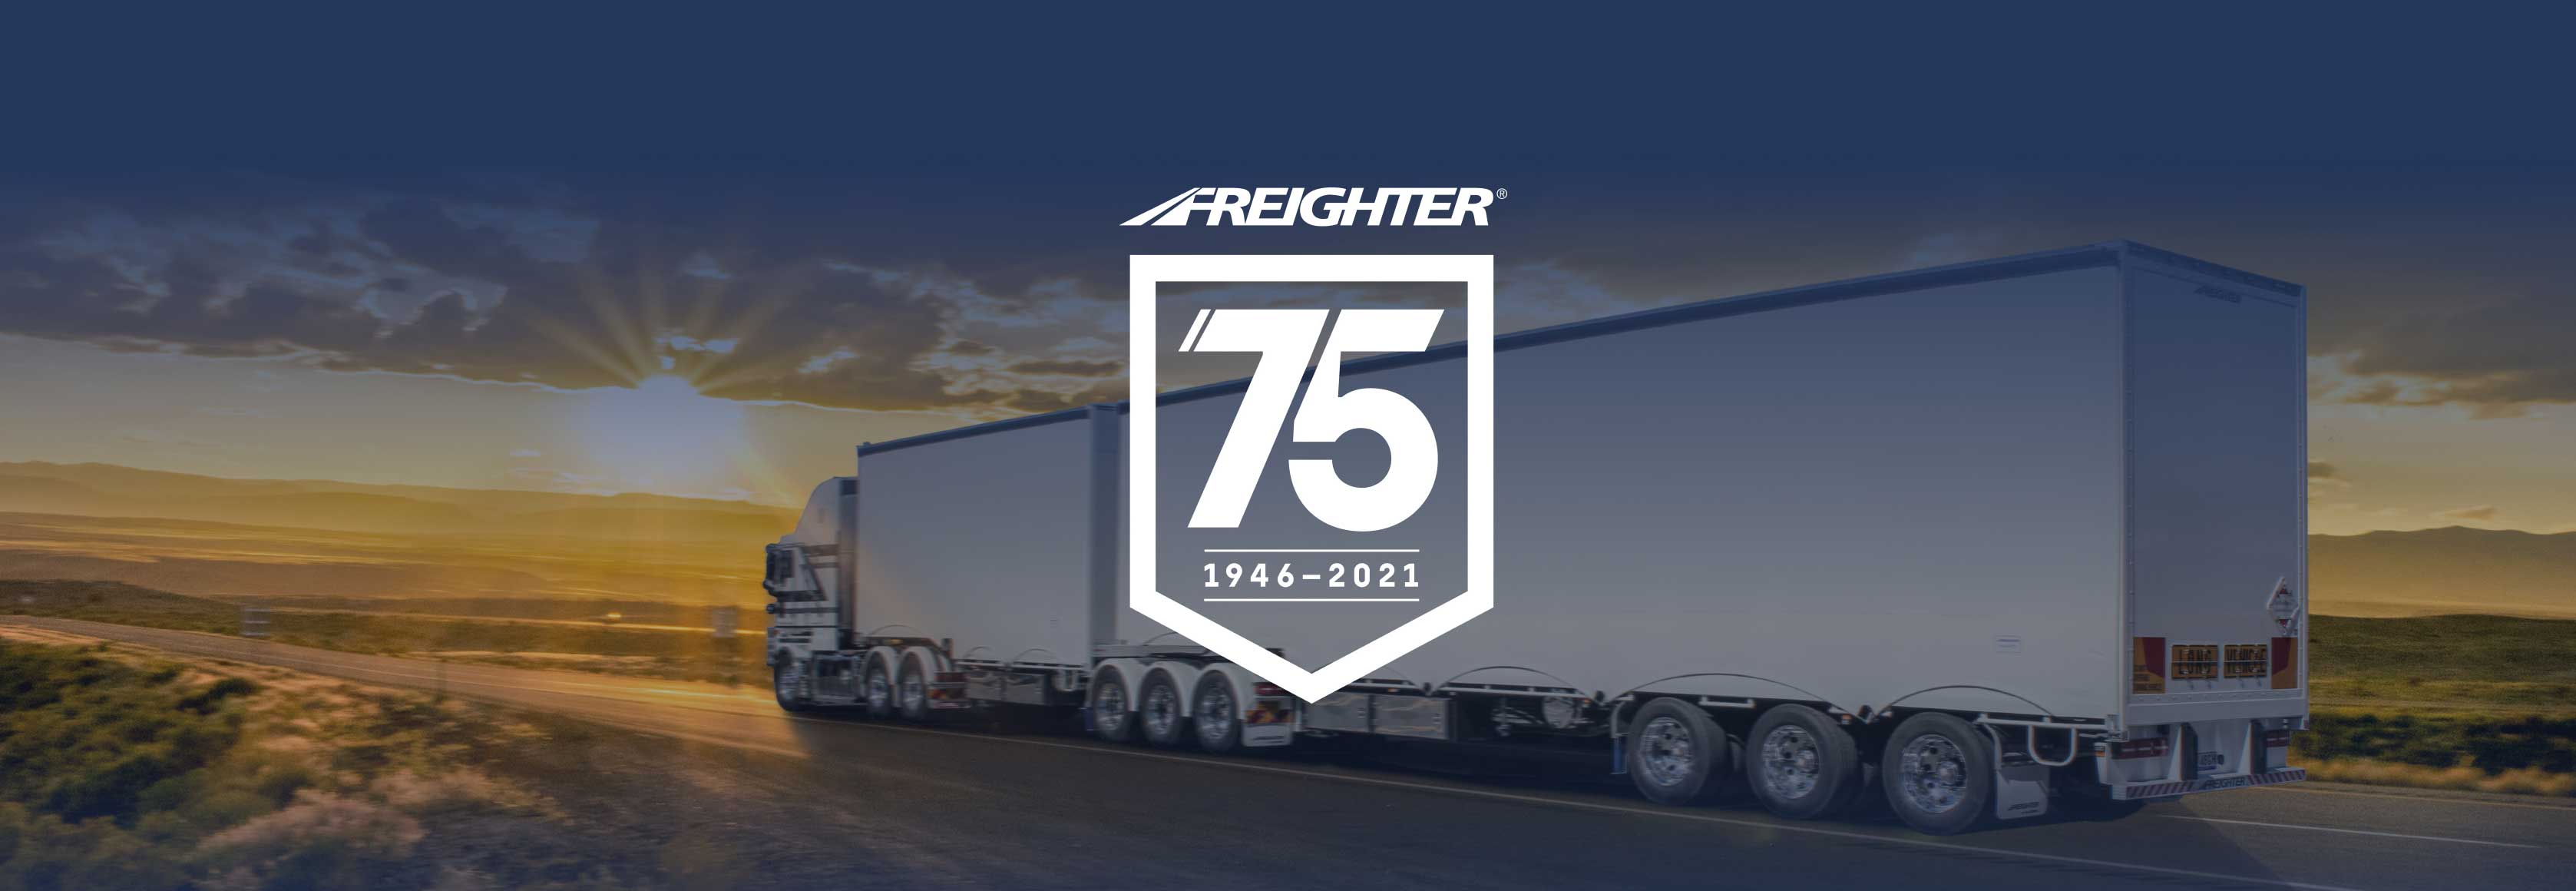 Freighter Trailers; for 75 years 